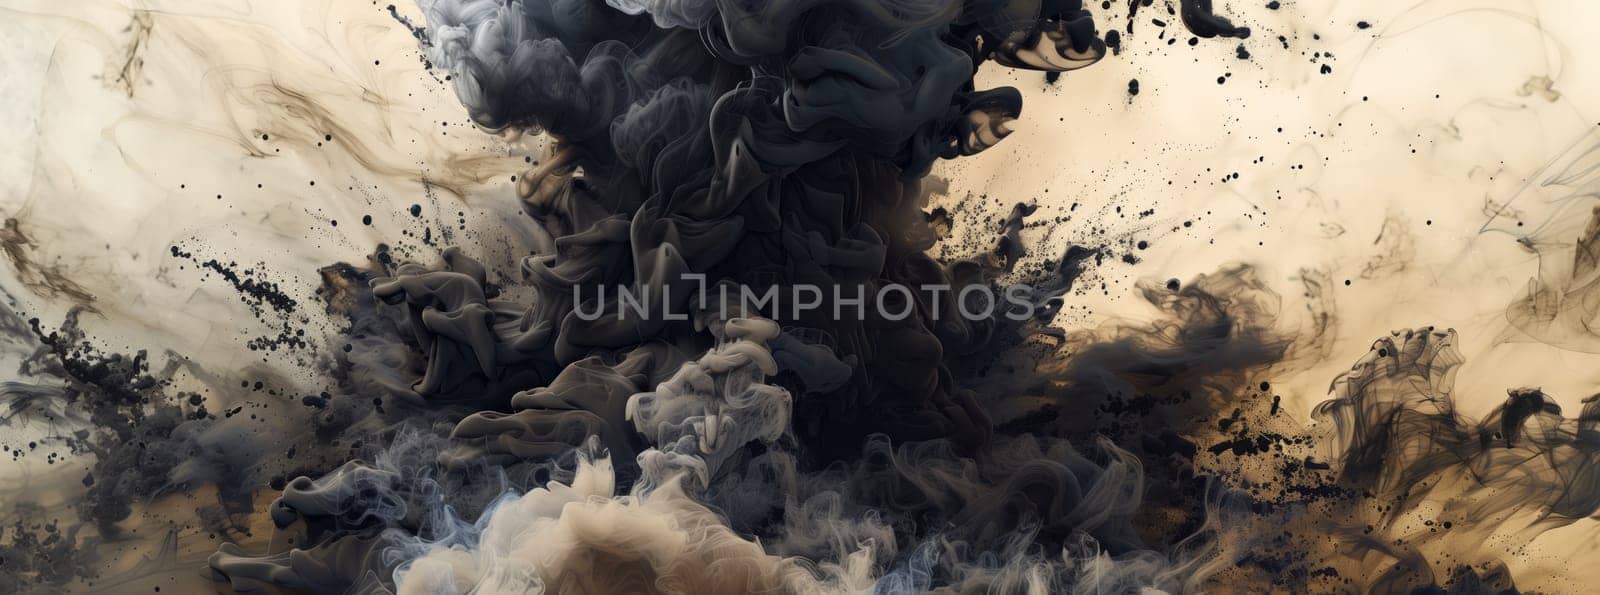 A massive cloud of smoke billows from the landscape, rising from the ground like a dark event. Trees, rocks, and buildings are enveloped in the haze